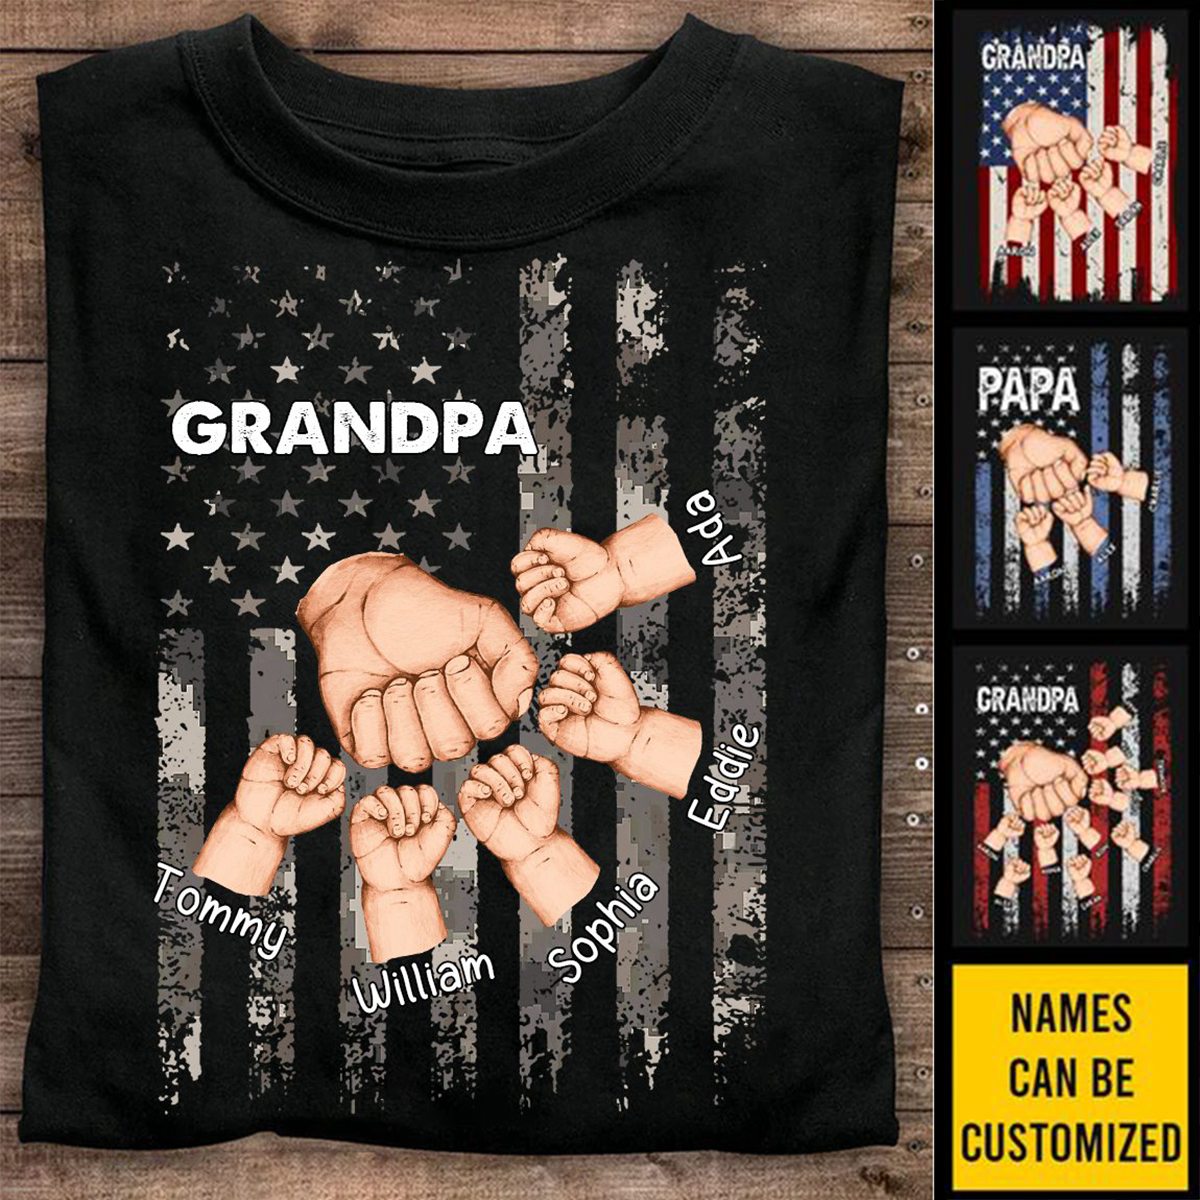 Grandpa Is Like Dad Without Rules - Family Personalized Custom Unisex T-shirt